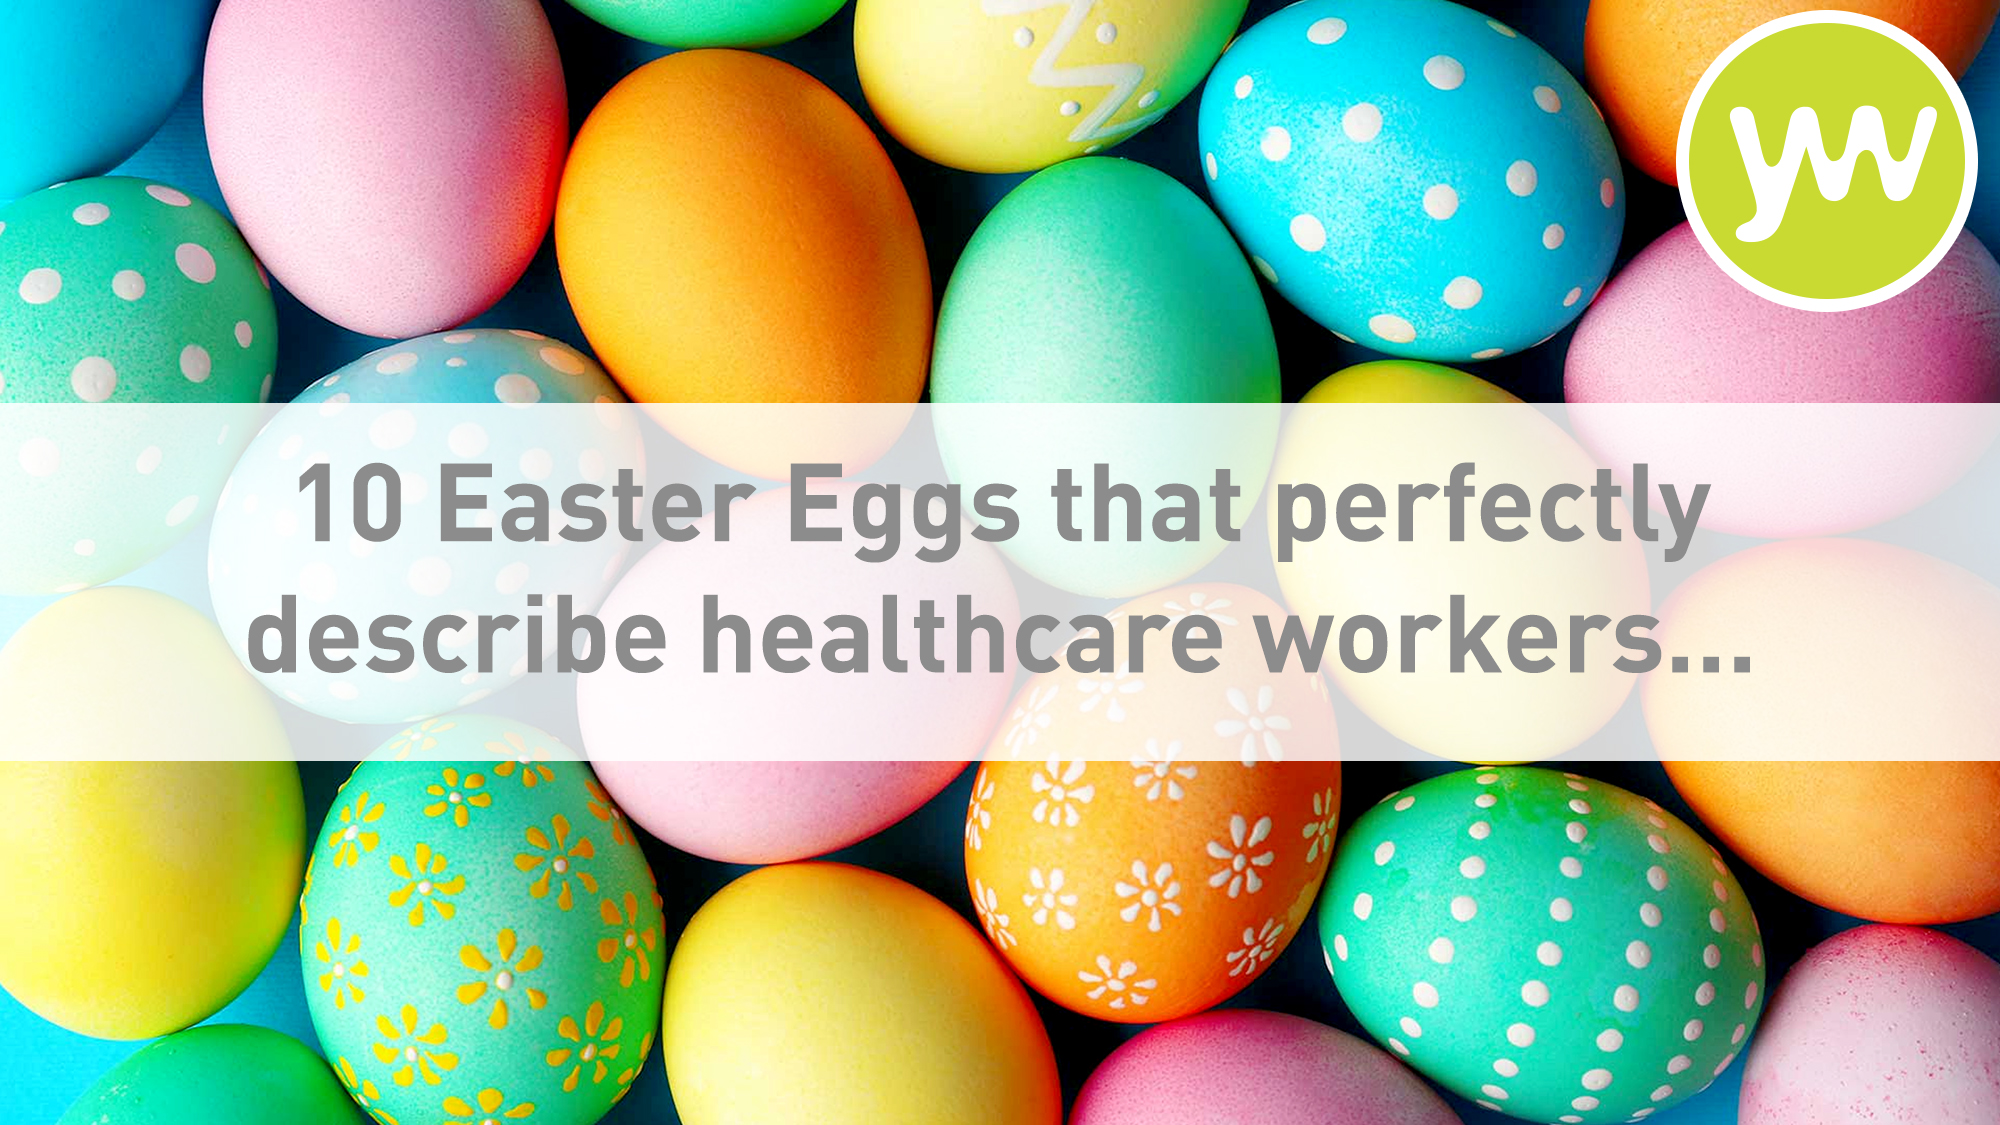 View 10 Easter eggs that perfectly describe healthcare workers